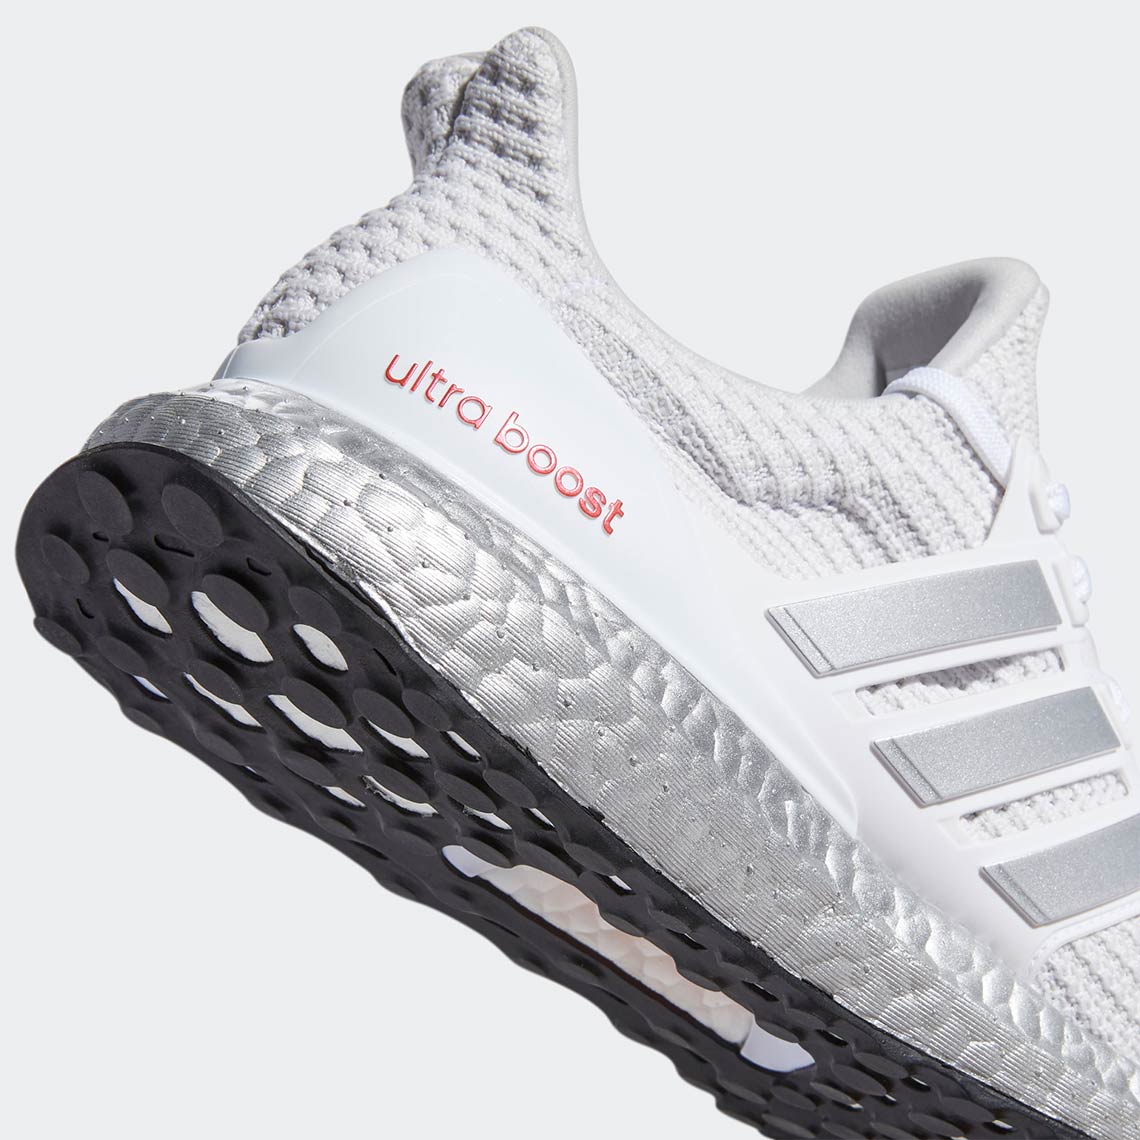 Adidas Ultra Boost 4.0 Dna White G55461 6